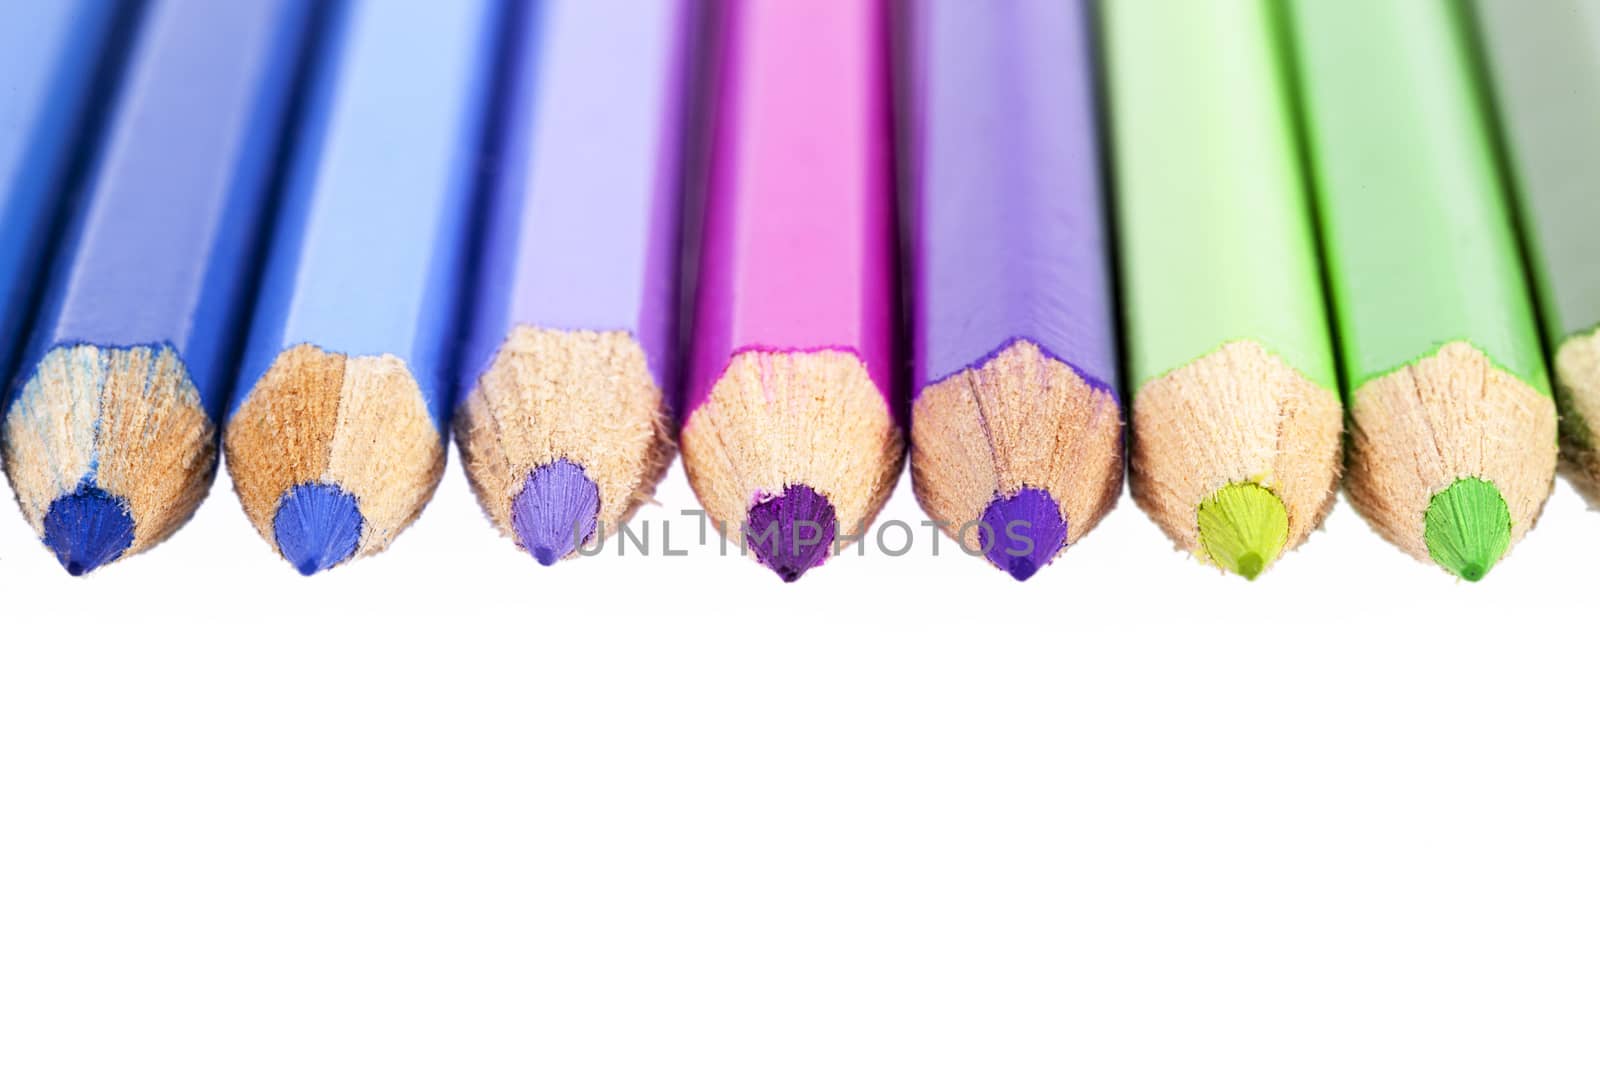 Chipped colored crayons on white background, close up